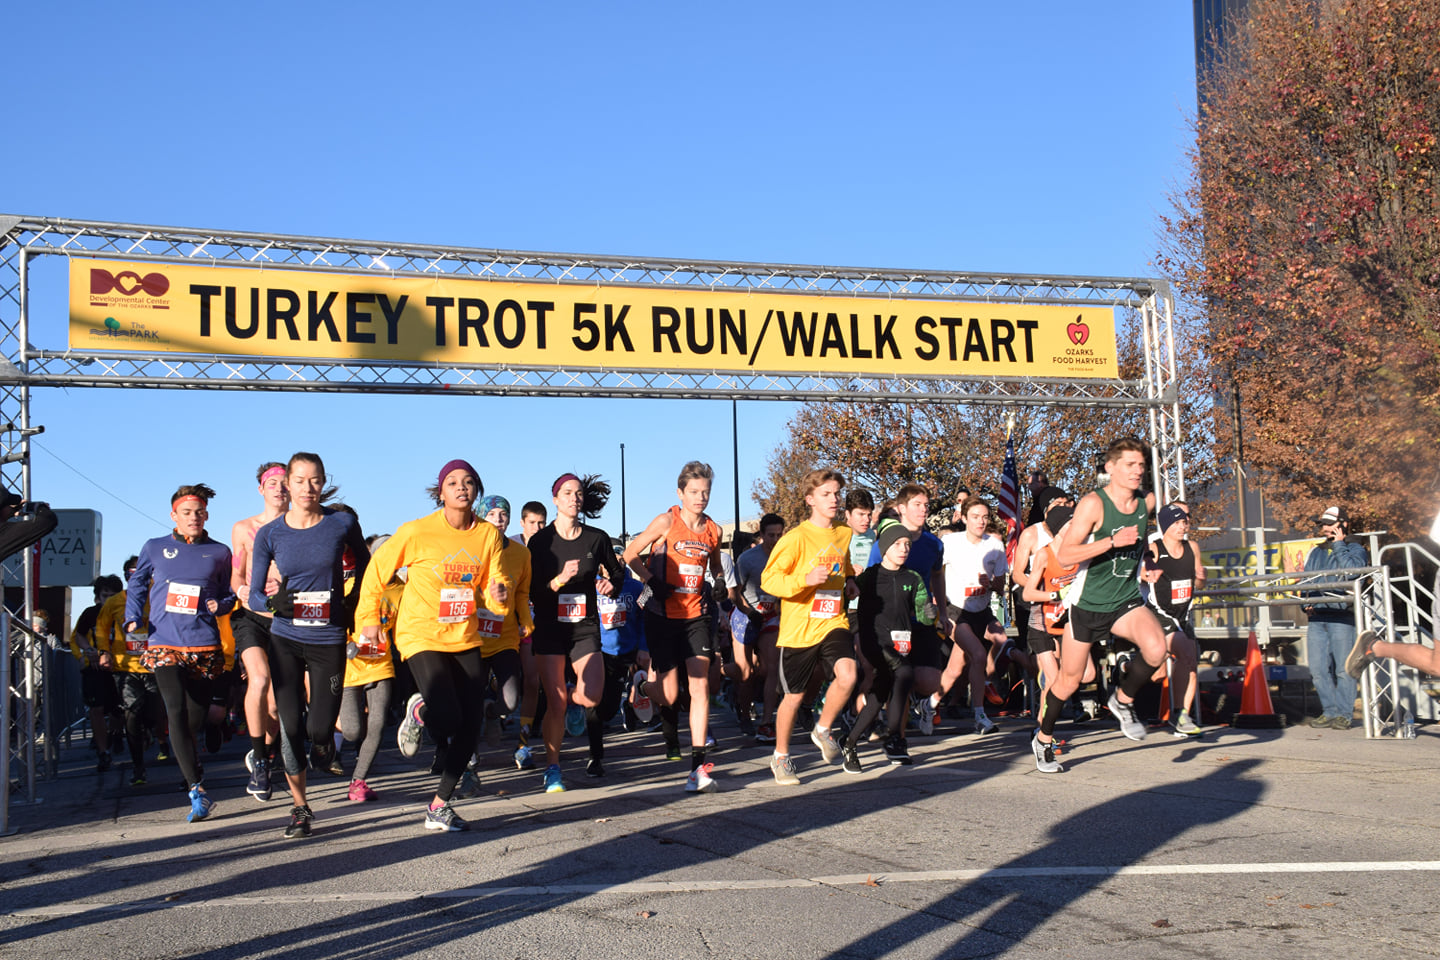 Scenes from a previous Turkey Trot in downtown Springfield